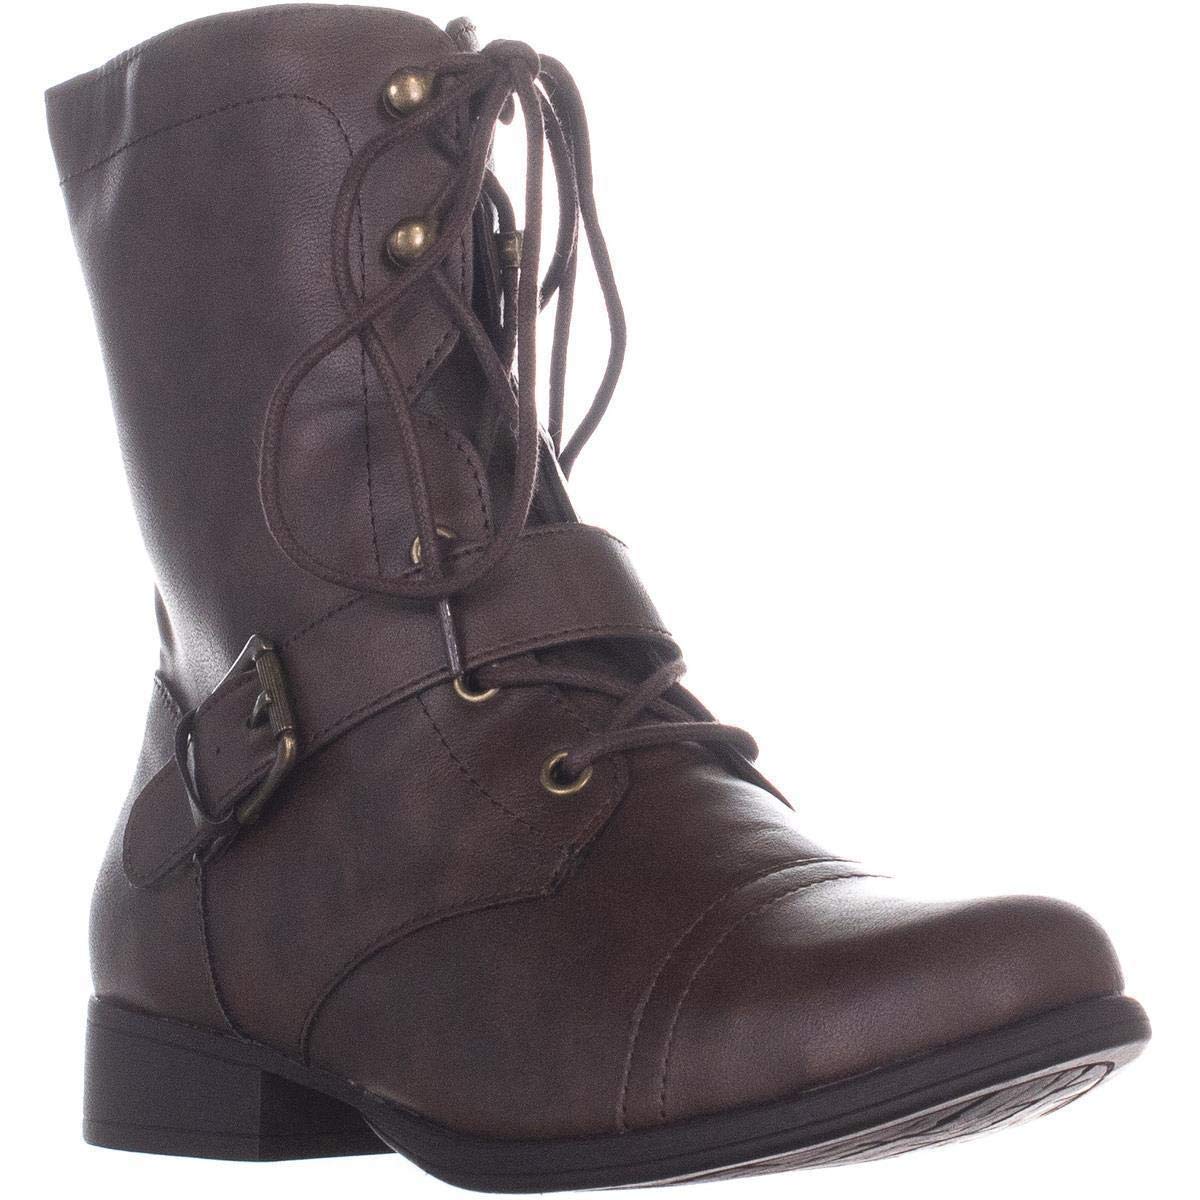 American Rag Womens Farrah Open Toe Ankle Combat Boots, Brown, Size 8.0 ...